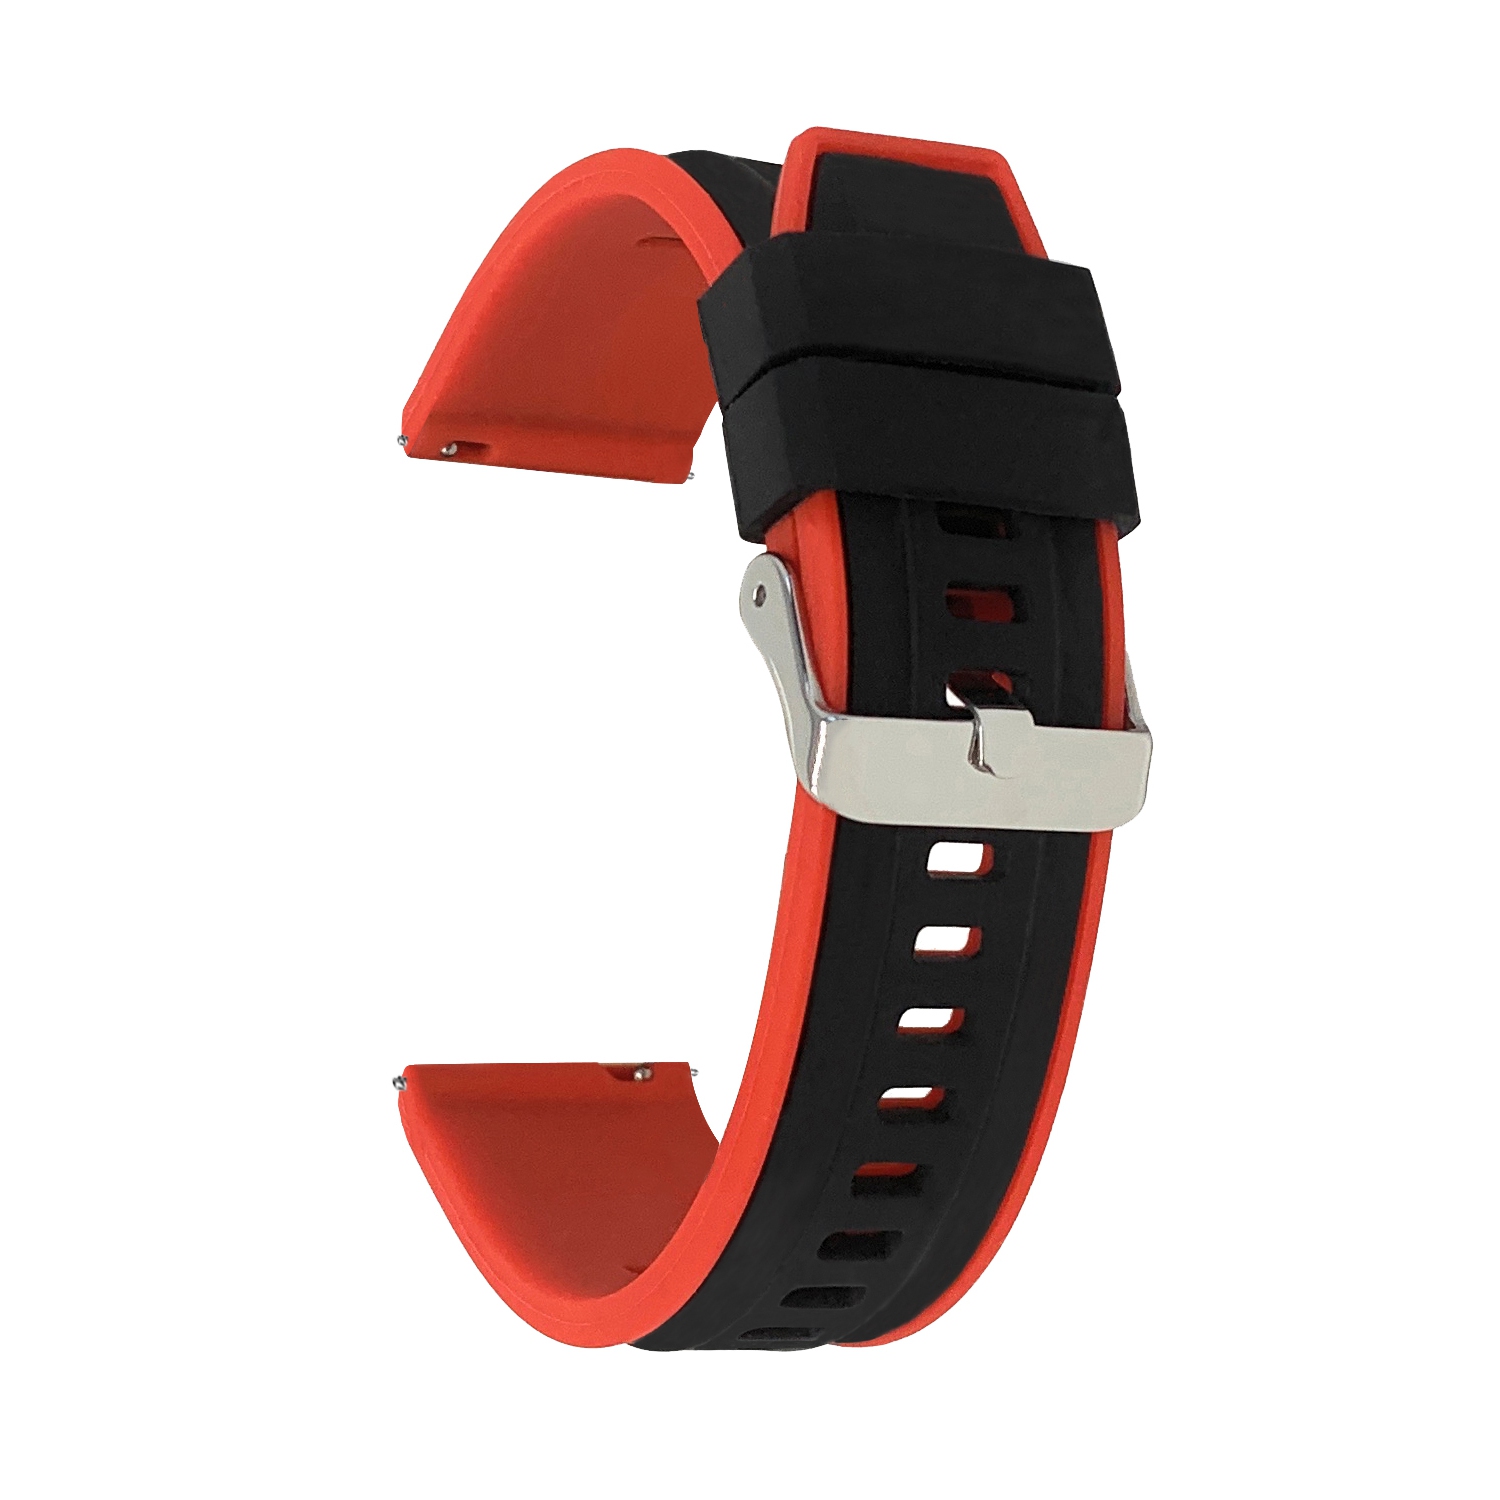 Bandini Quick Release Two-Tone Rubber Silicone Smart Watch Strap For Amazfit Bip, U, S, Lite, GTR 42mm, GTS - 20mm, Black / Red / Silver Buckle